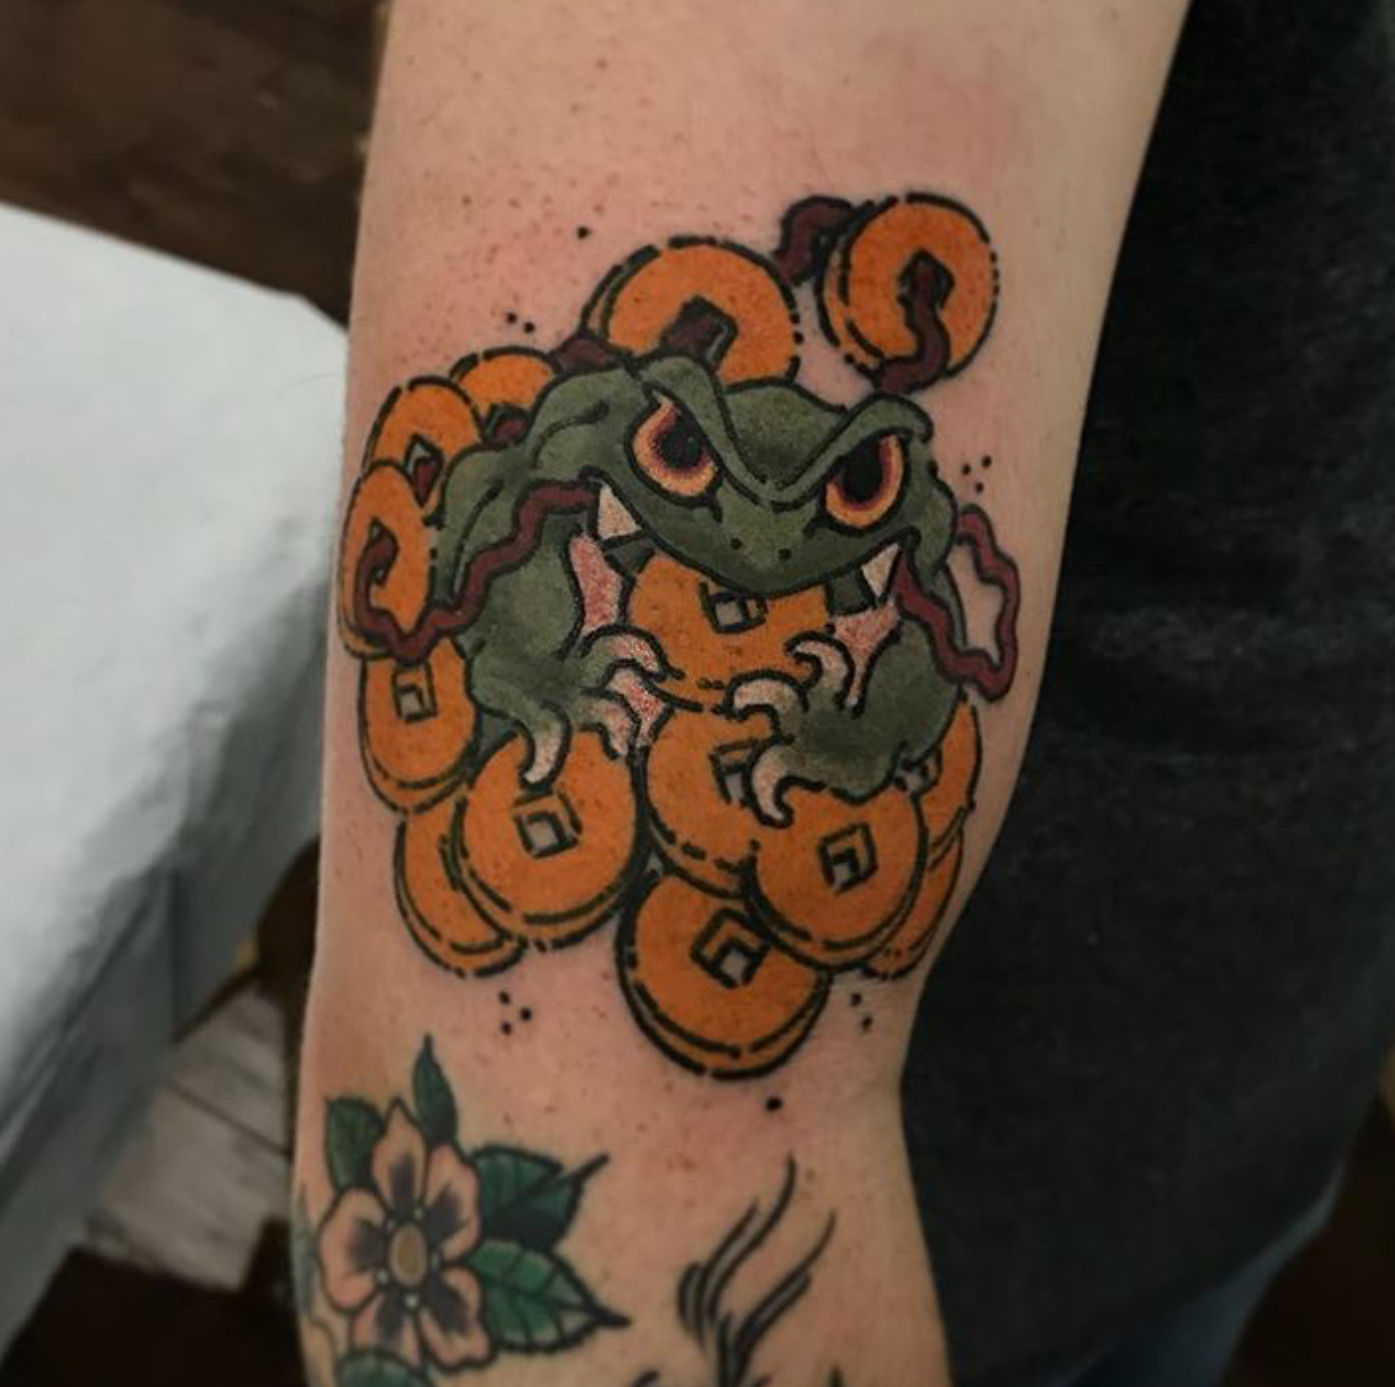 Money frog | Frog tattoos, Tattoos, Tattoos with meaning